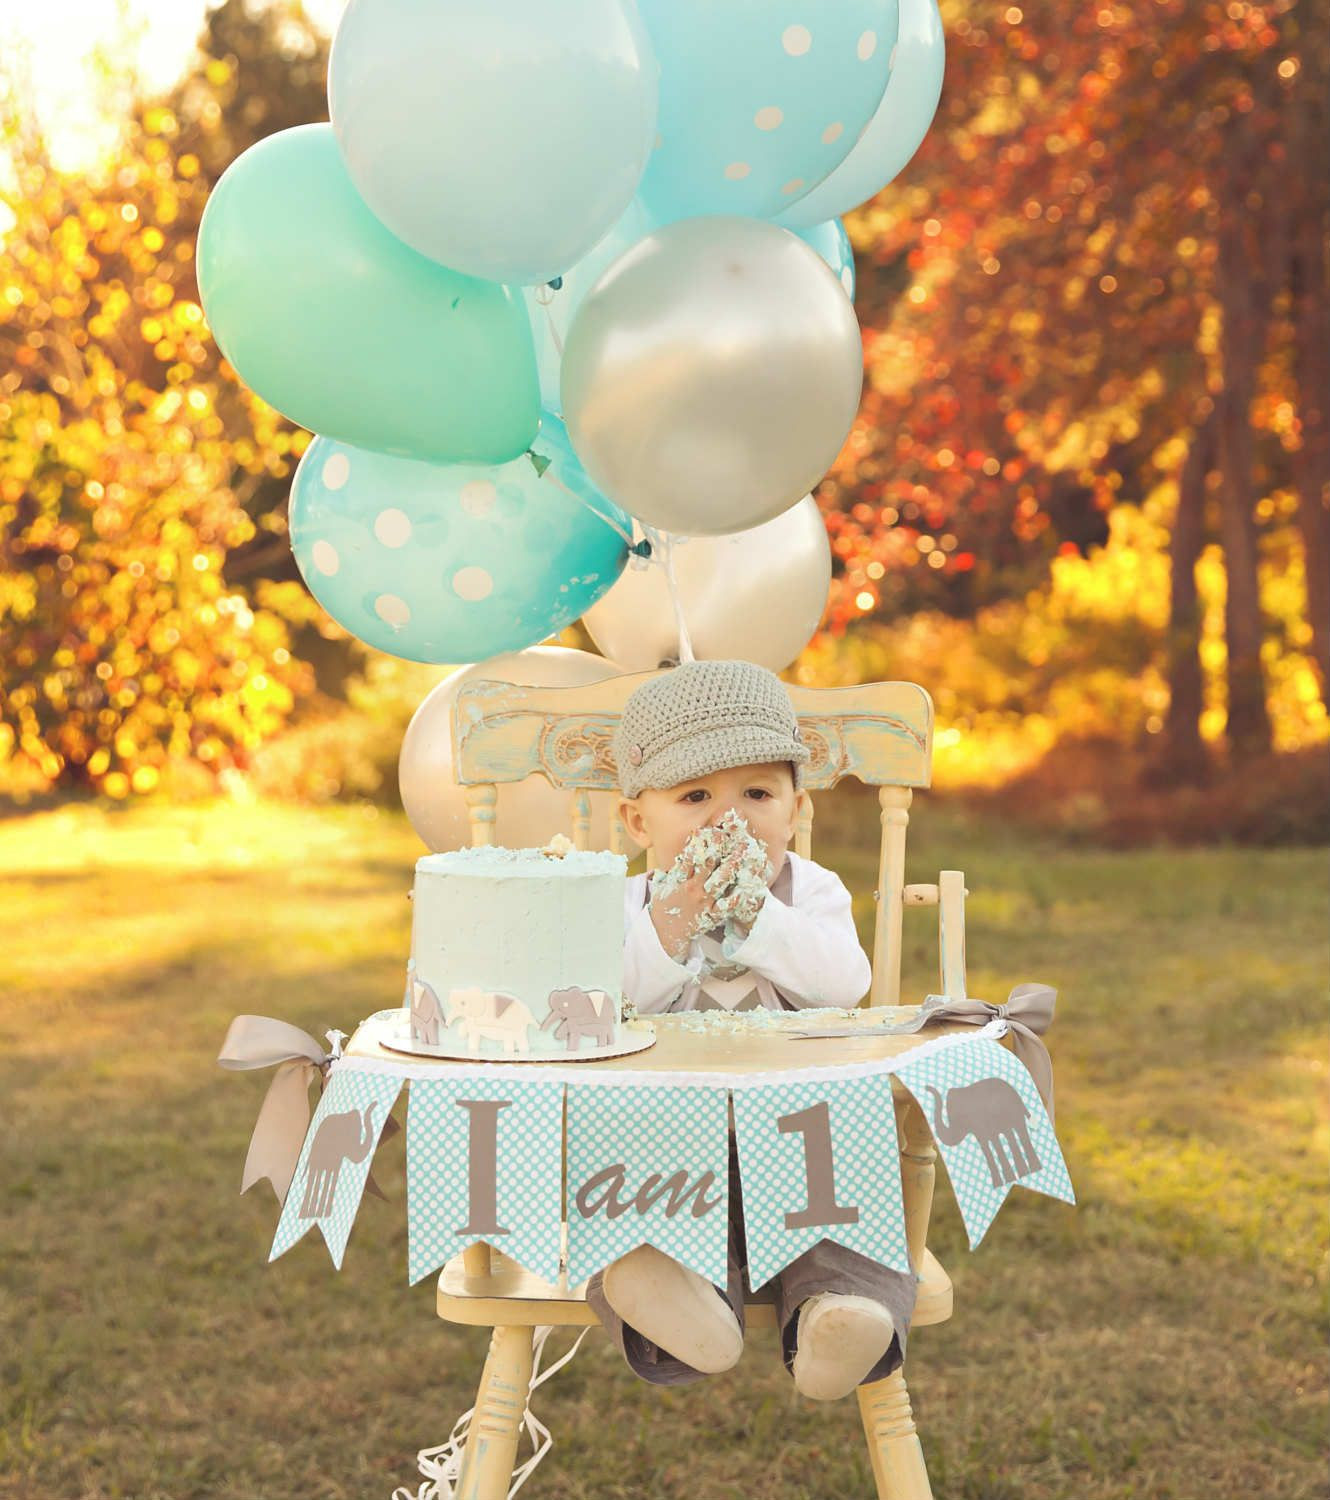 Gift Ideas Baby'S First Birthday
 10 1st Birthday Party Ideas for Boys Part 2